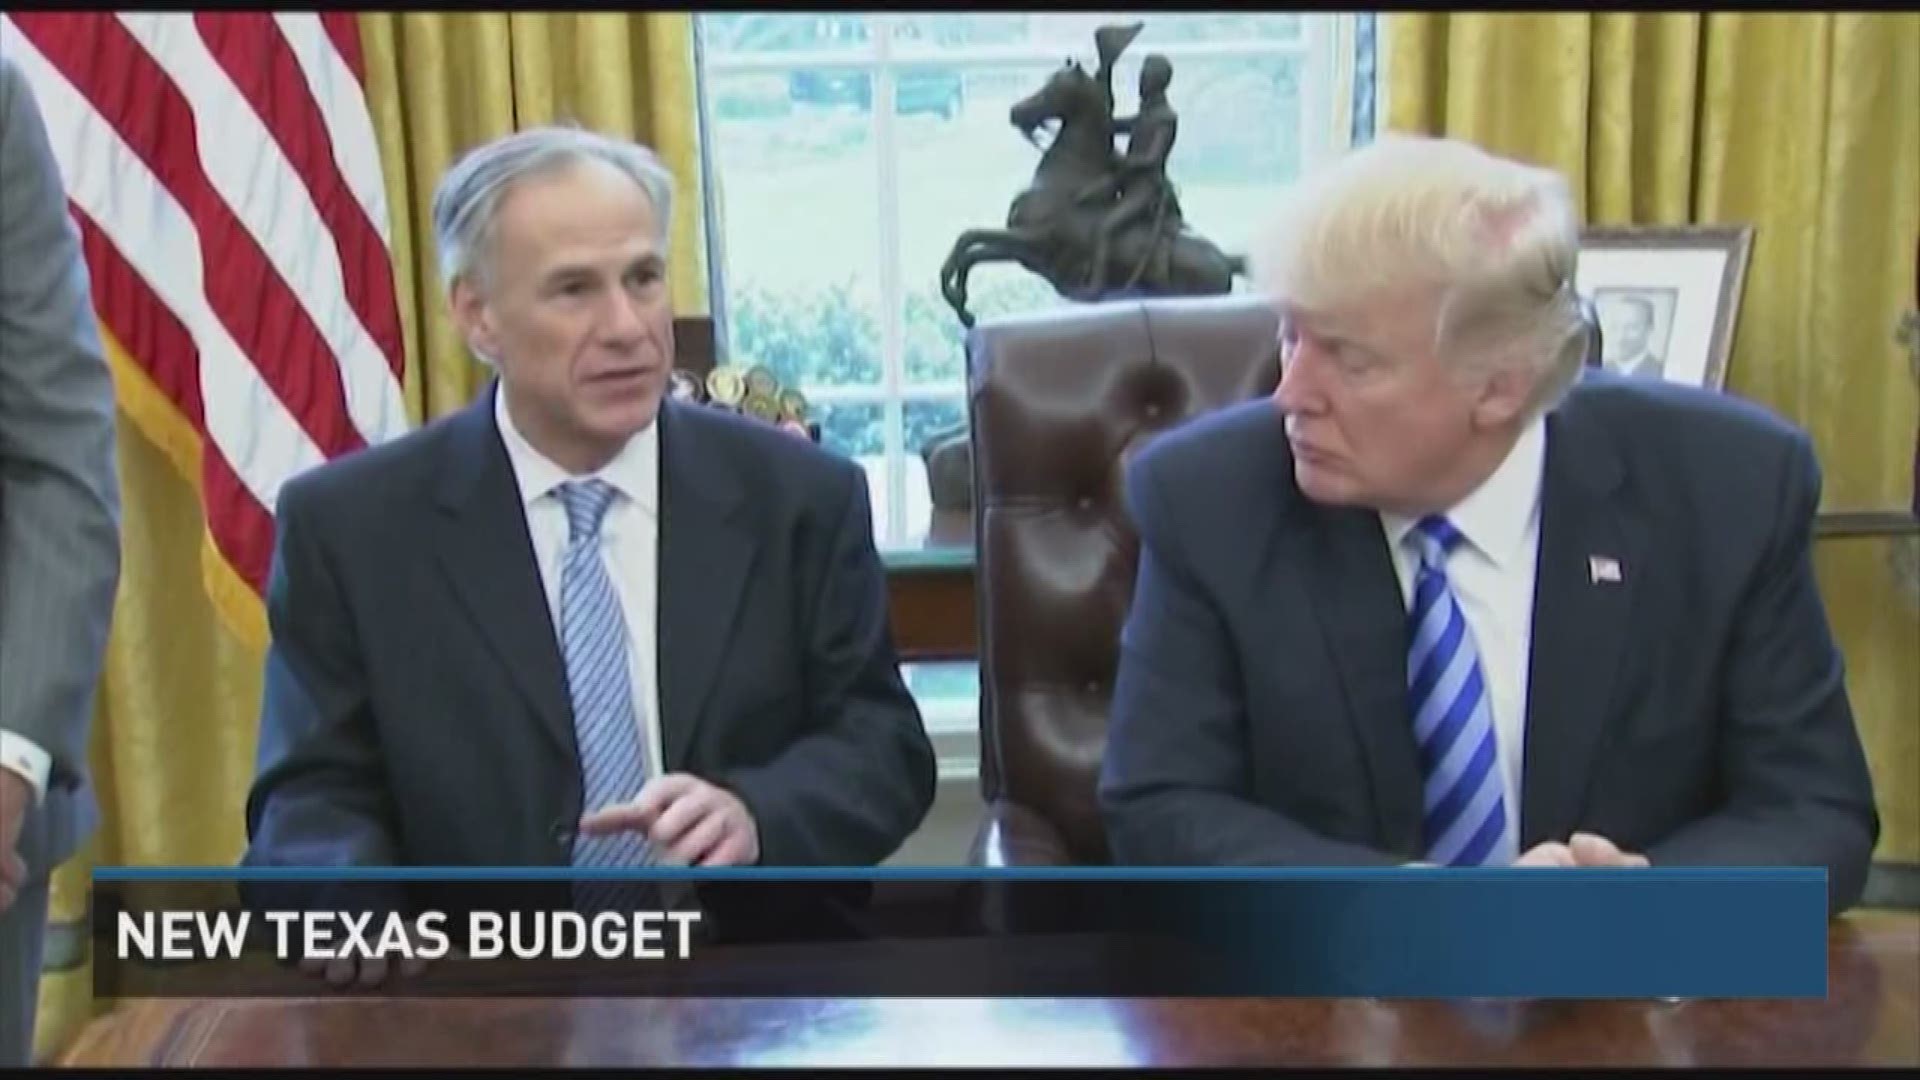 Governor Abbott signed into law a 2018-2019 budget worth $217 billion.